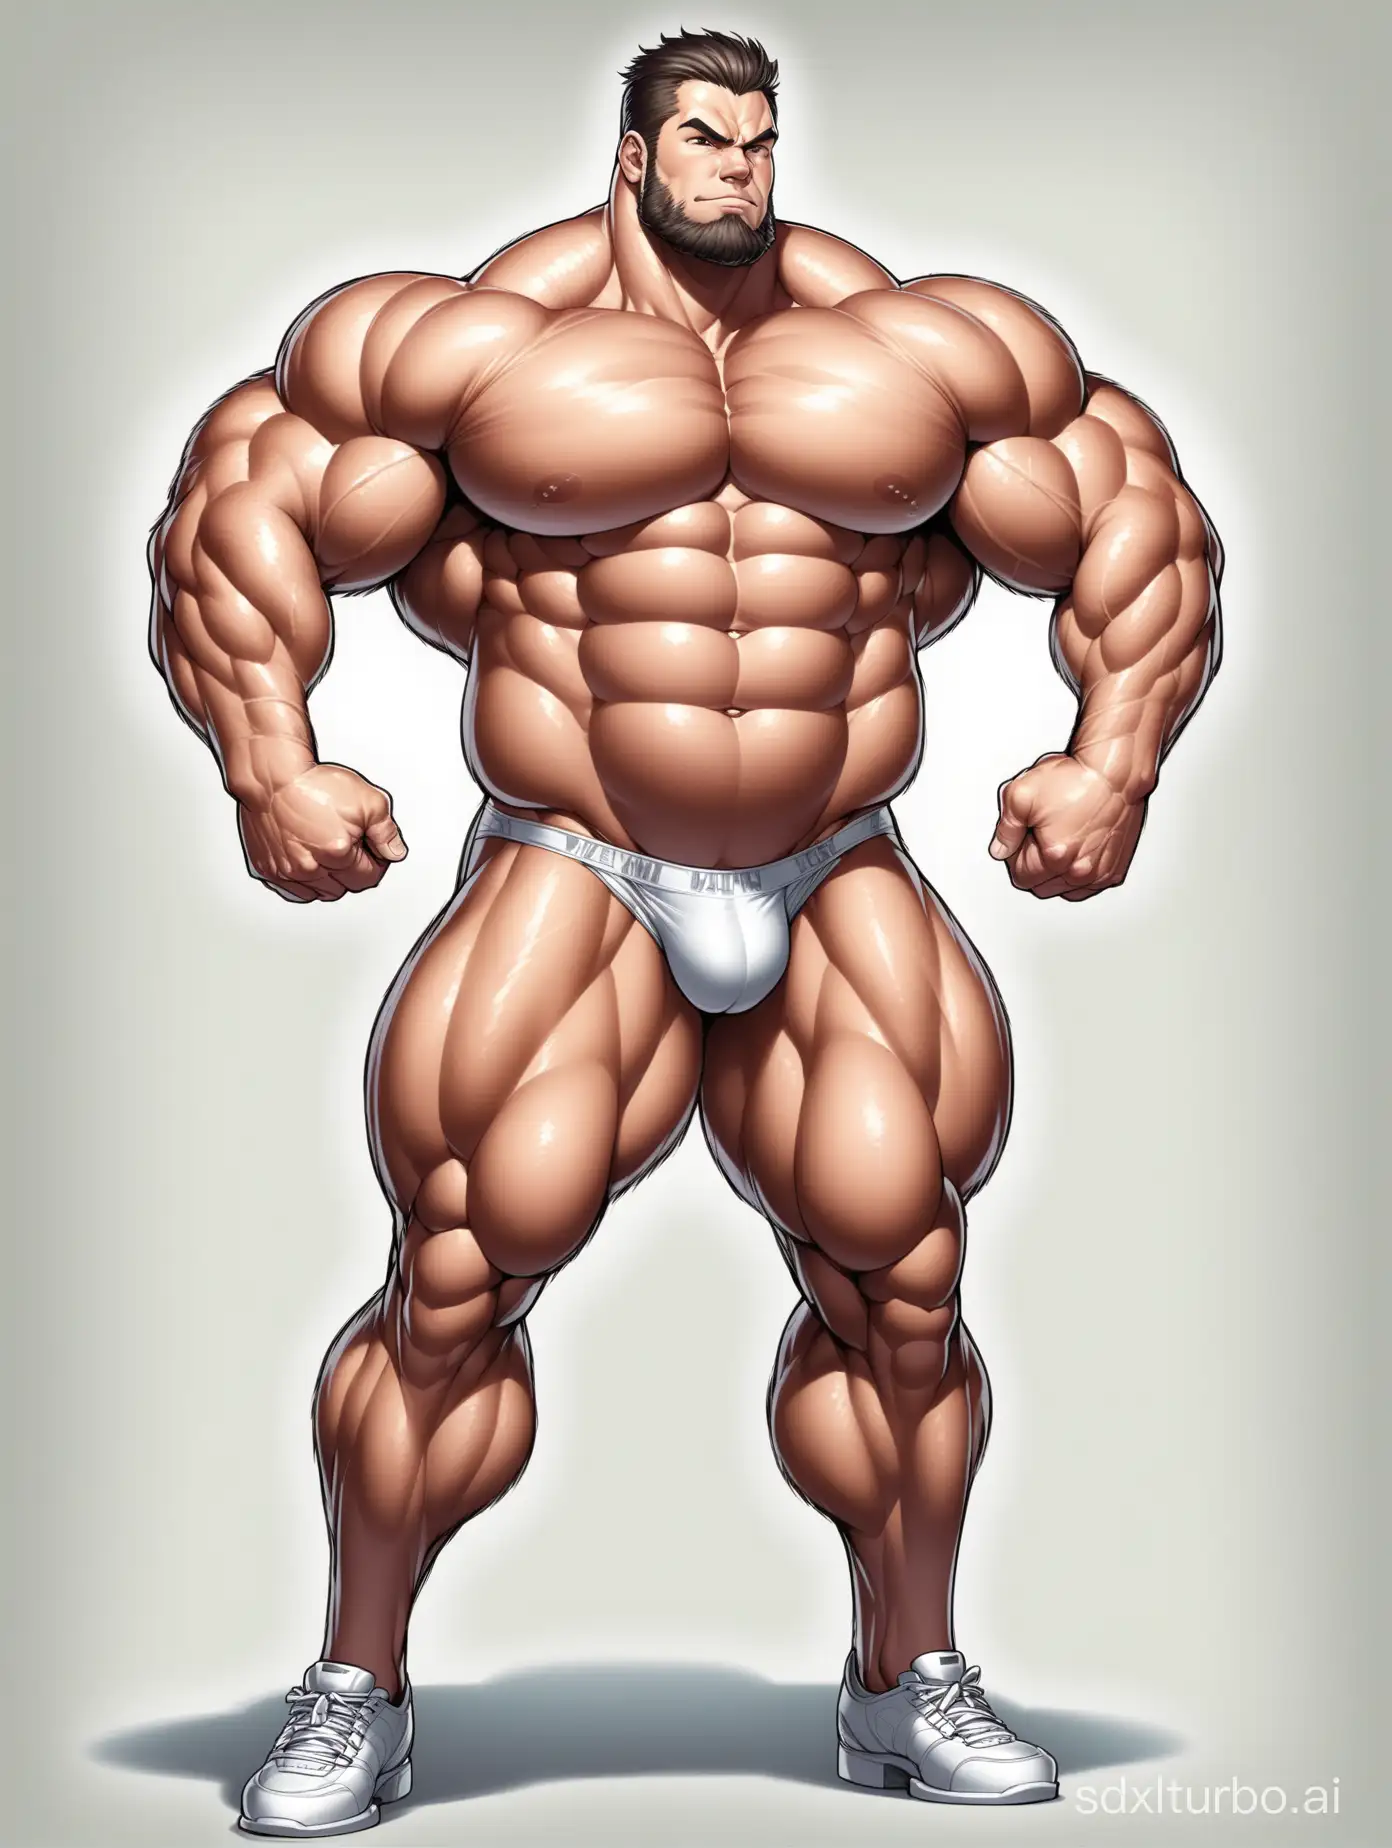 White skin and massive muscle stud, much bodyhair. Huge and giant and Strong body. Very Long and strong legs. 2m tall. very Big Chest. very Big biceps. 8-pack abs. Very Massive muscle Body. Wearing underwear. he is giant tall. very fat. very fat. very fat. Full Body diagram. very long strong legs.very long legs.very long legs. raise his arms to show his huge biceps. wearing white shoes. raise his arms to show his huge biceps.long hair.old man.